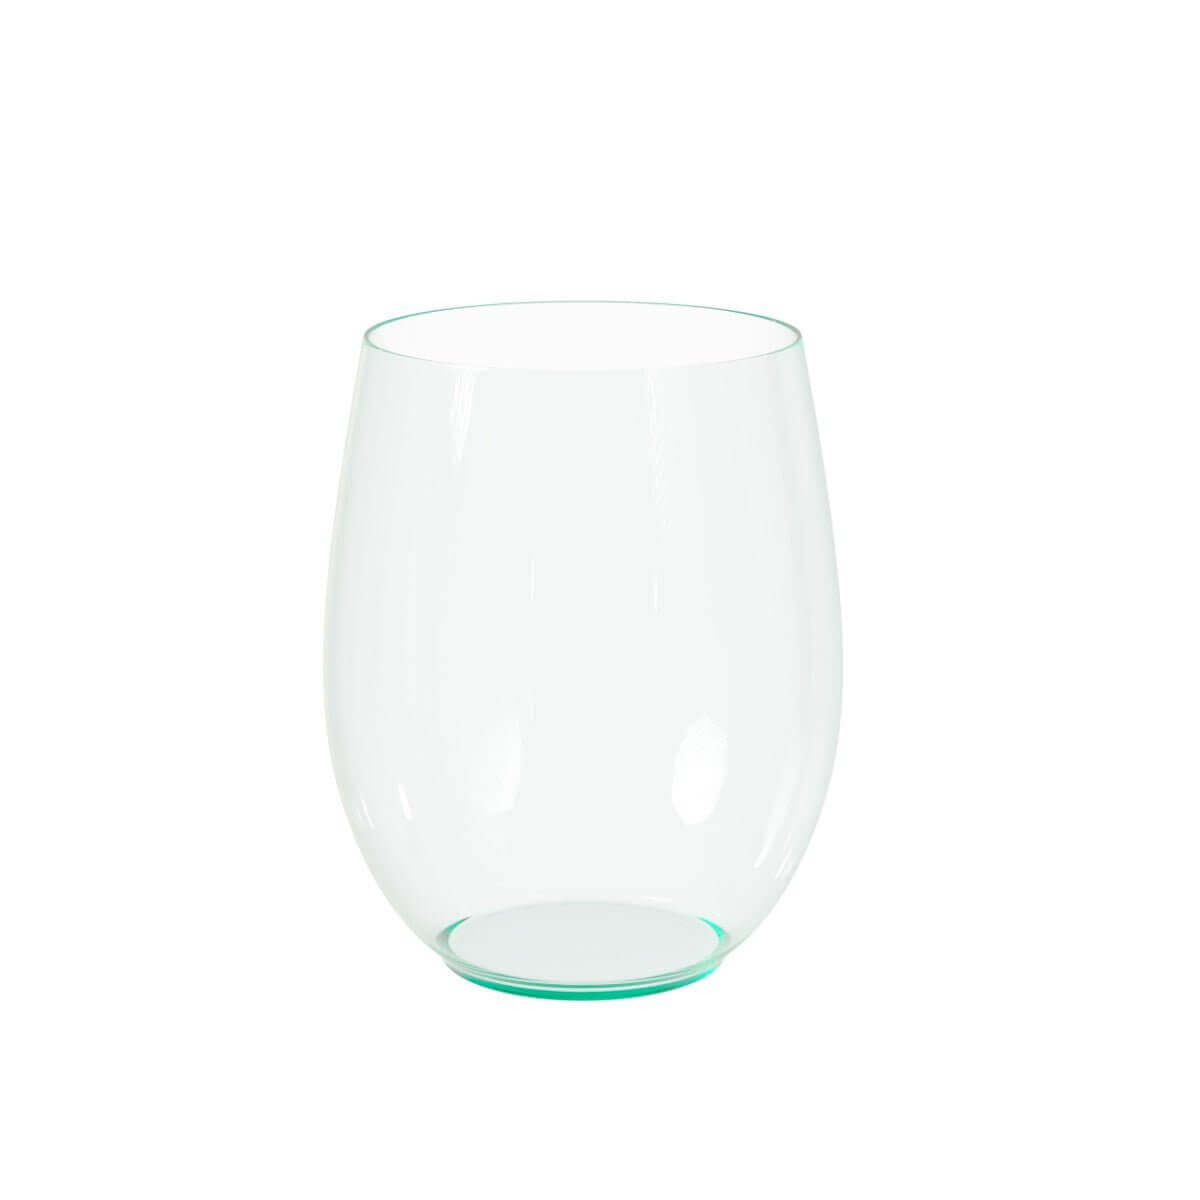 16 Oz. Green Tint Stemless Wine Cup | 24 Count - Yom Tov Settings